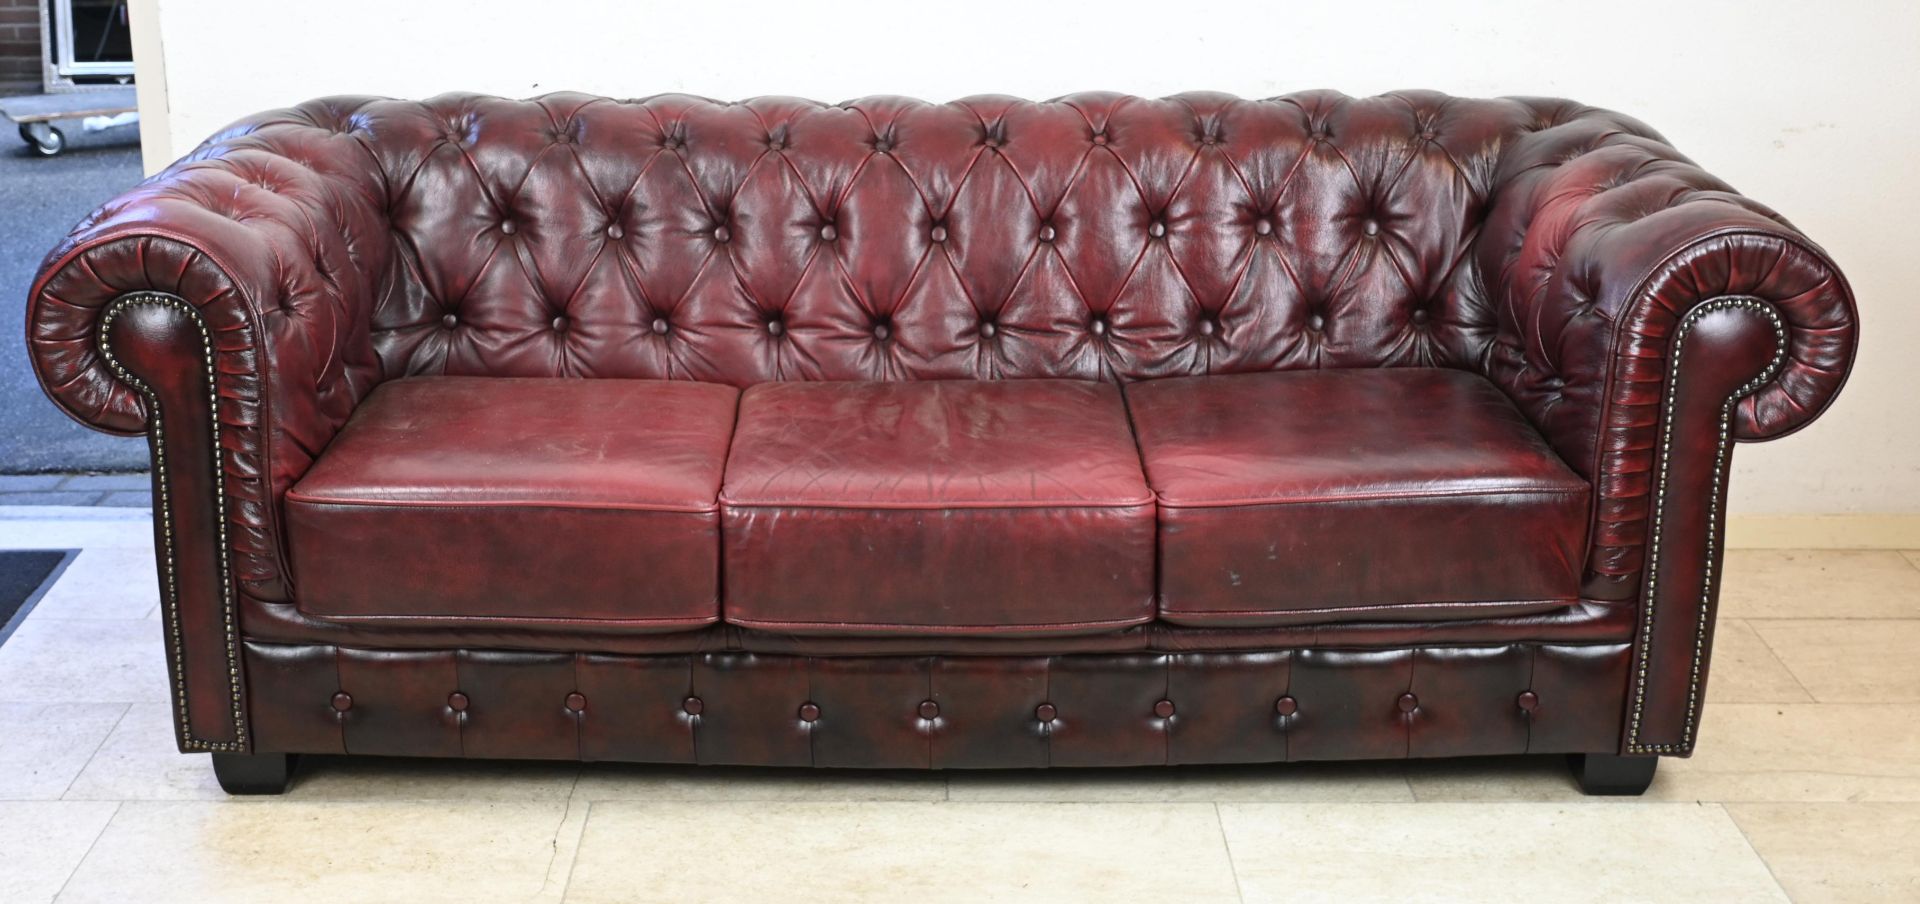 3-seater Chesterfield sofa